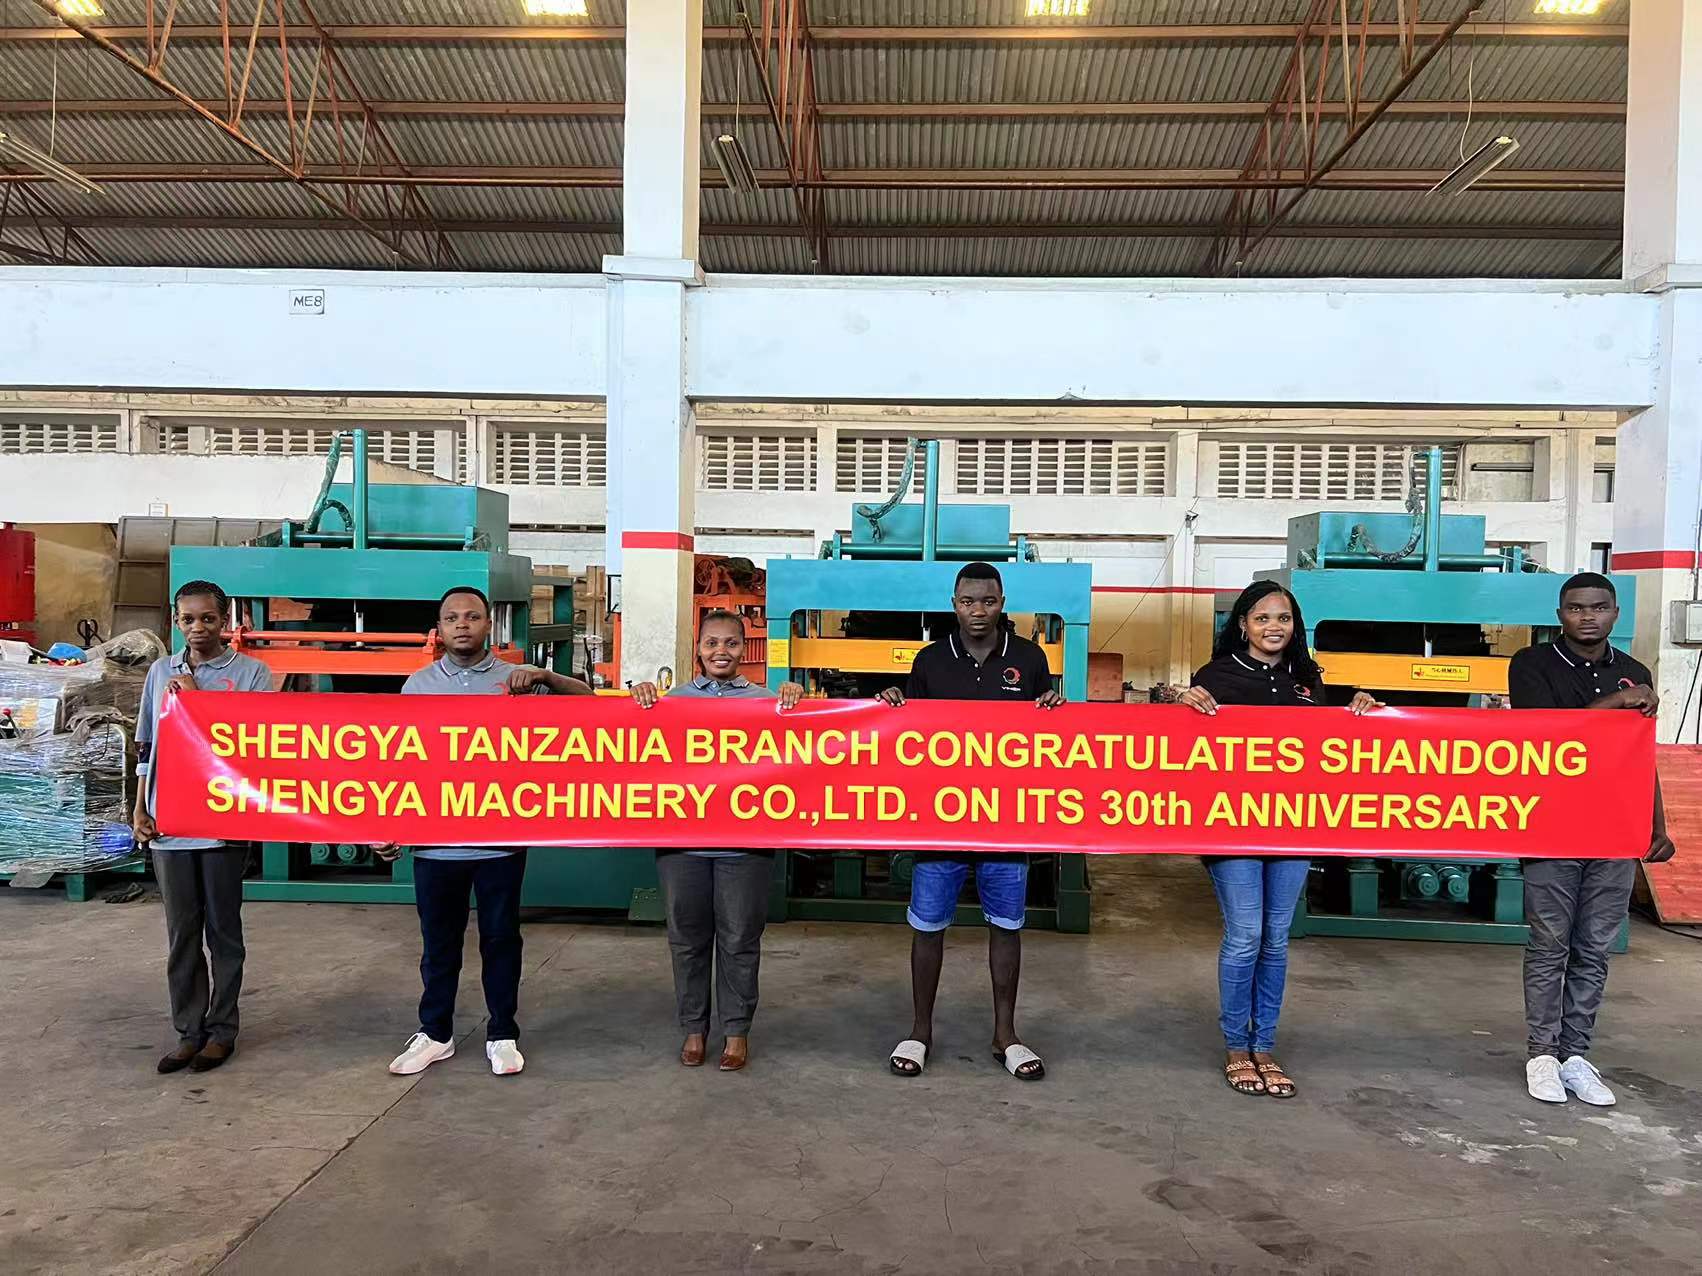 shengya Machinery Co., ltd is a professional manufacturer with 25years history in concrete pole machine, concrete block machine and clay interlocking brick mach